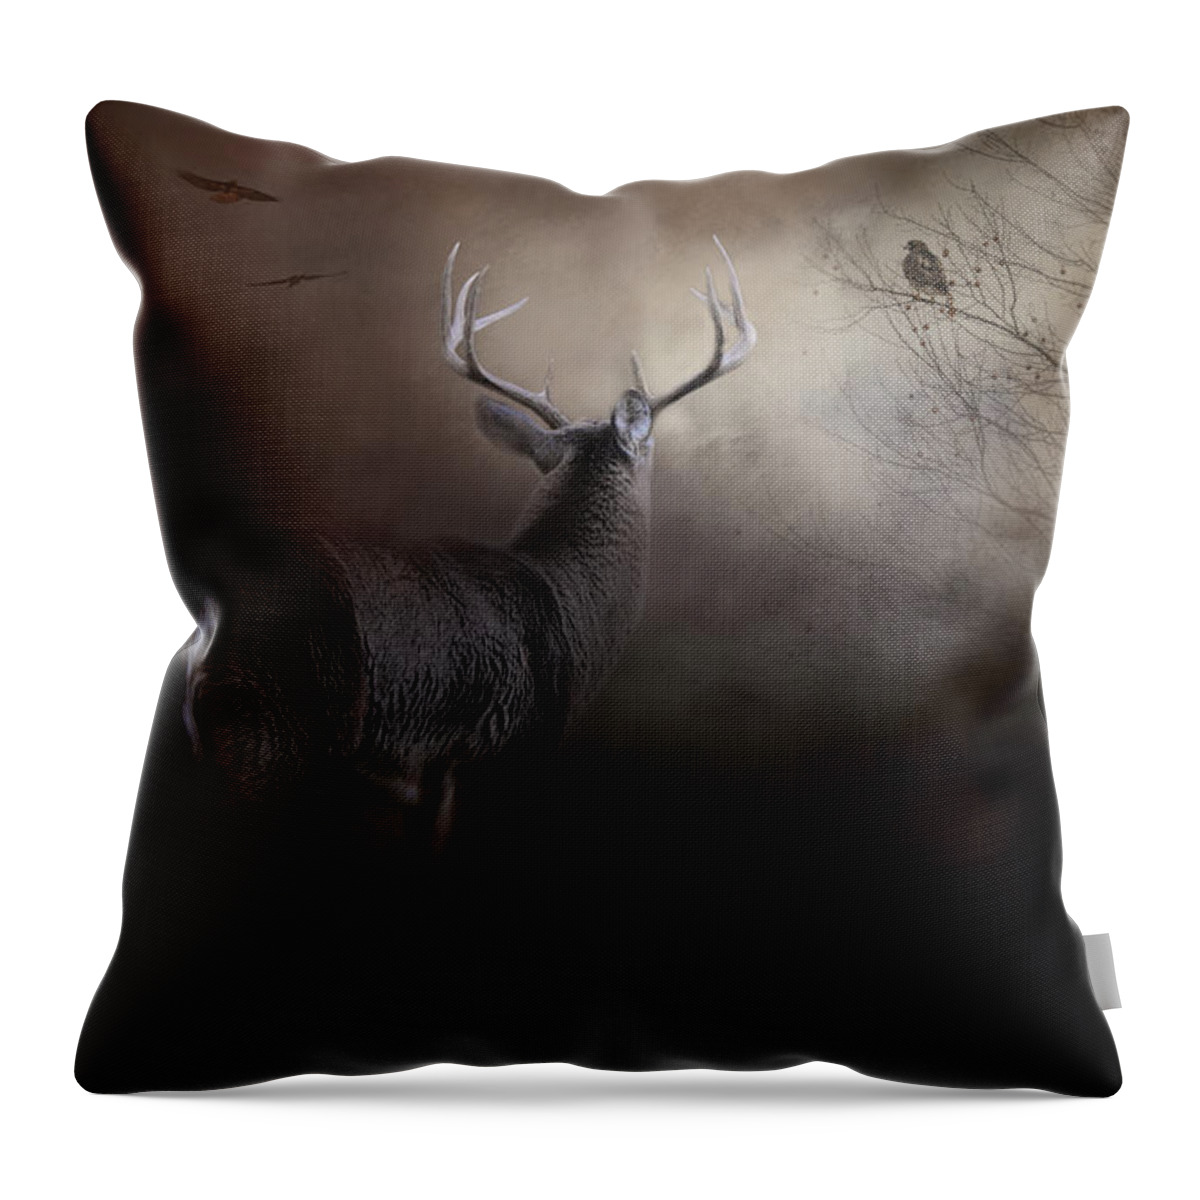 Jai Johnson Throw Pillow featuring the photograph Waiting For The Storm by Jai Johnson